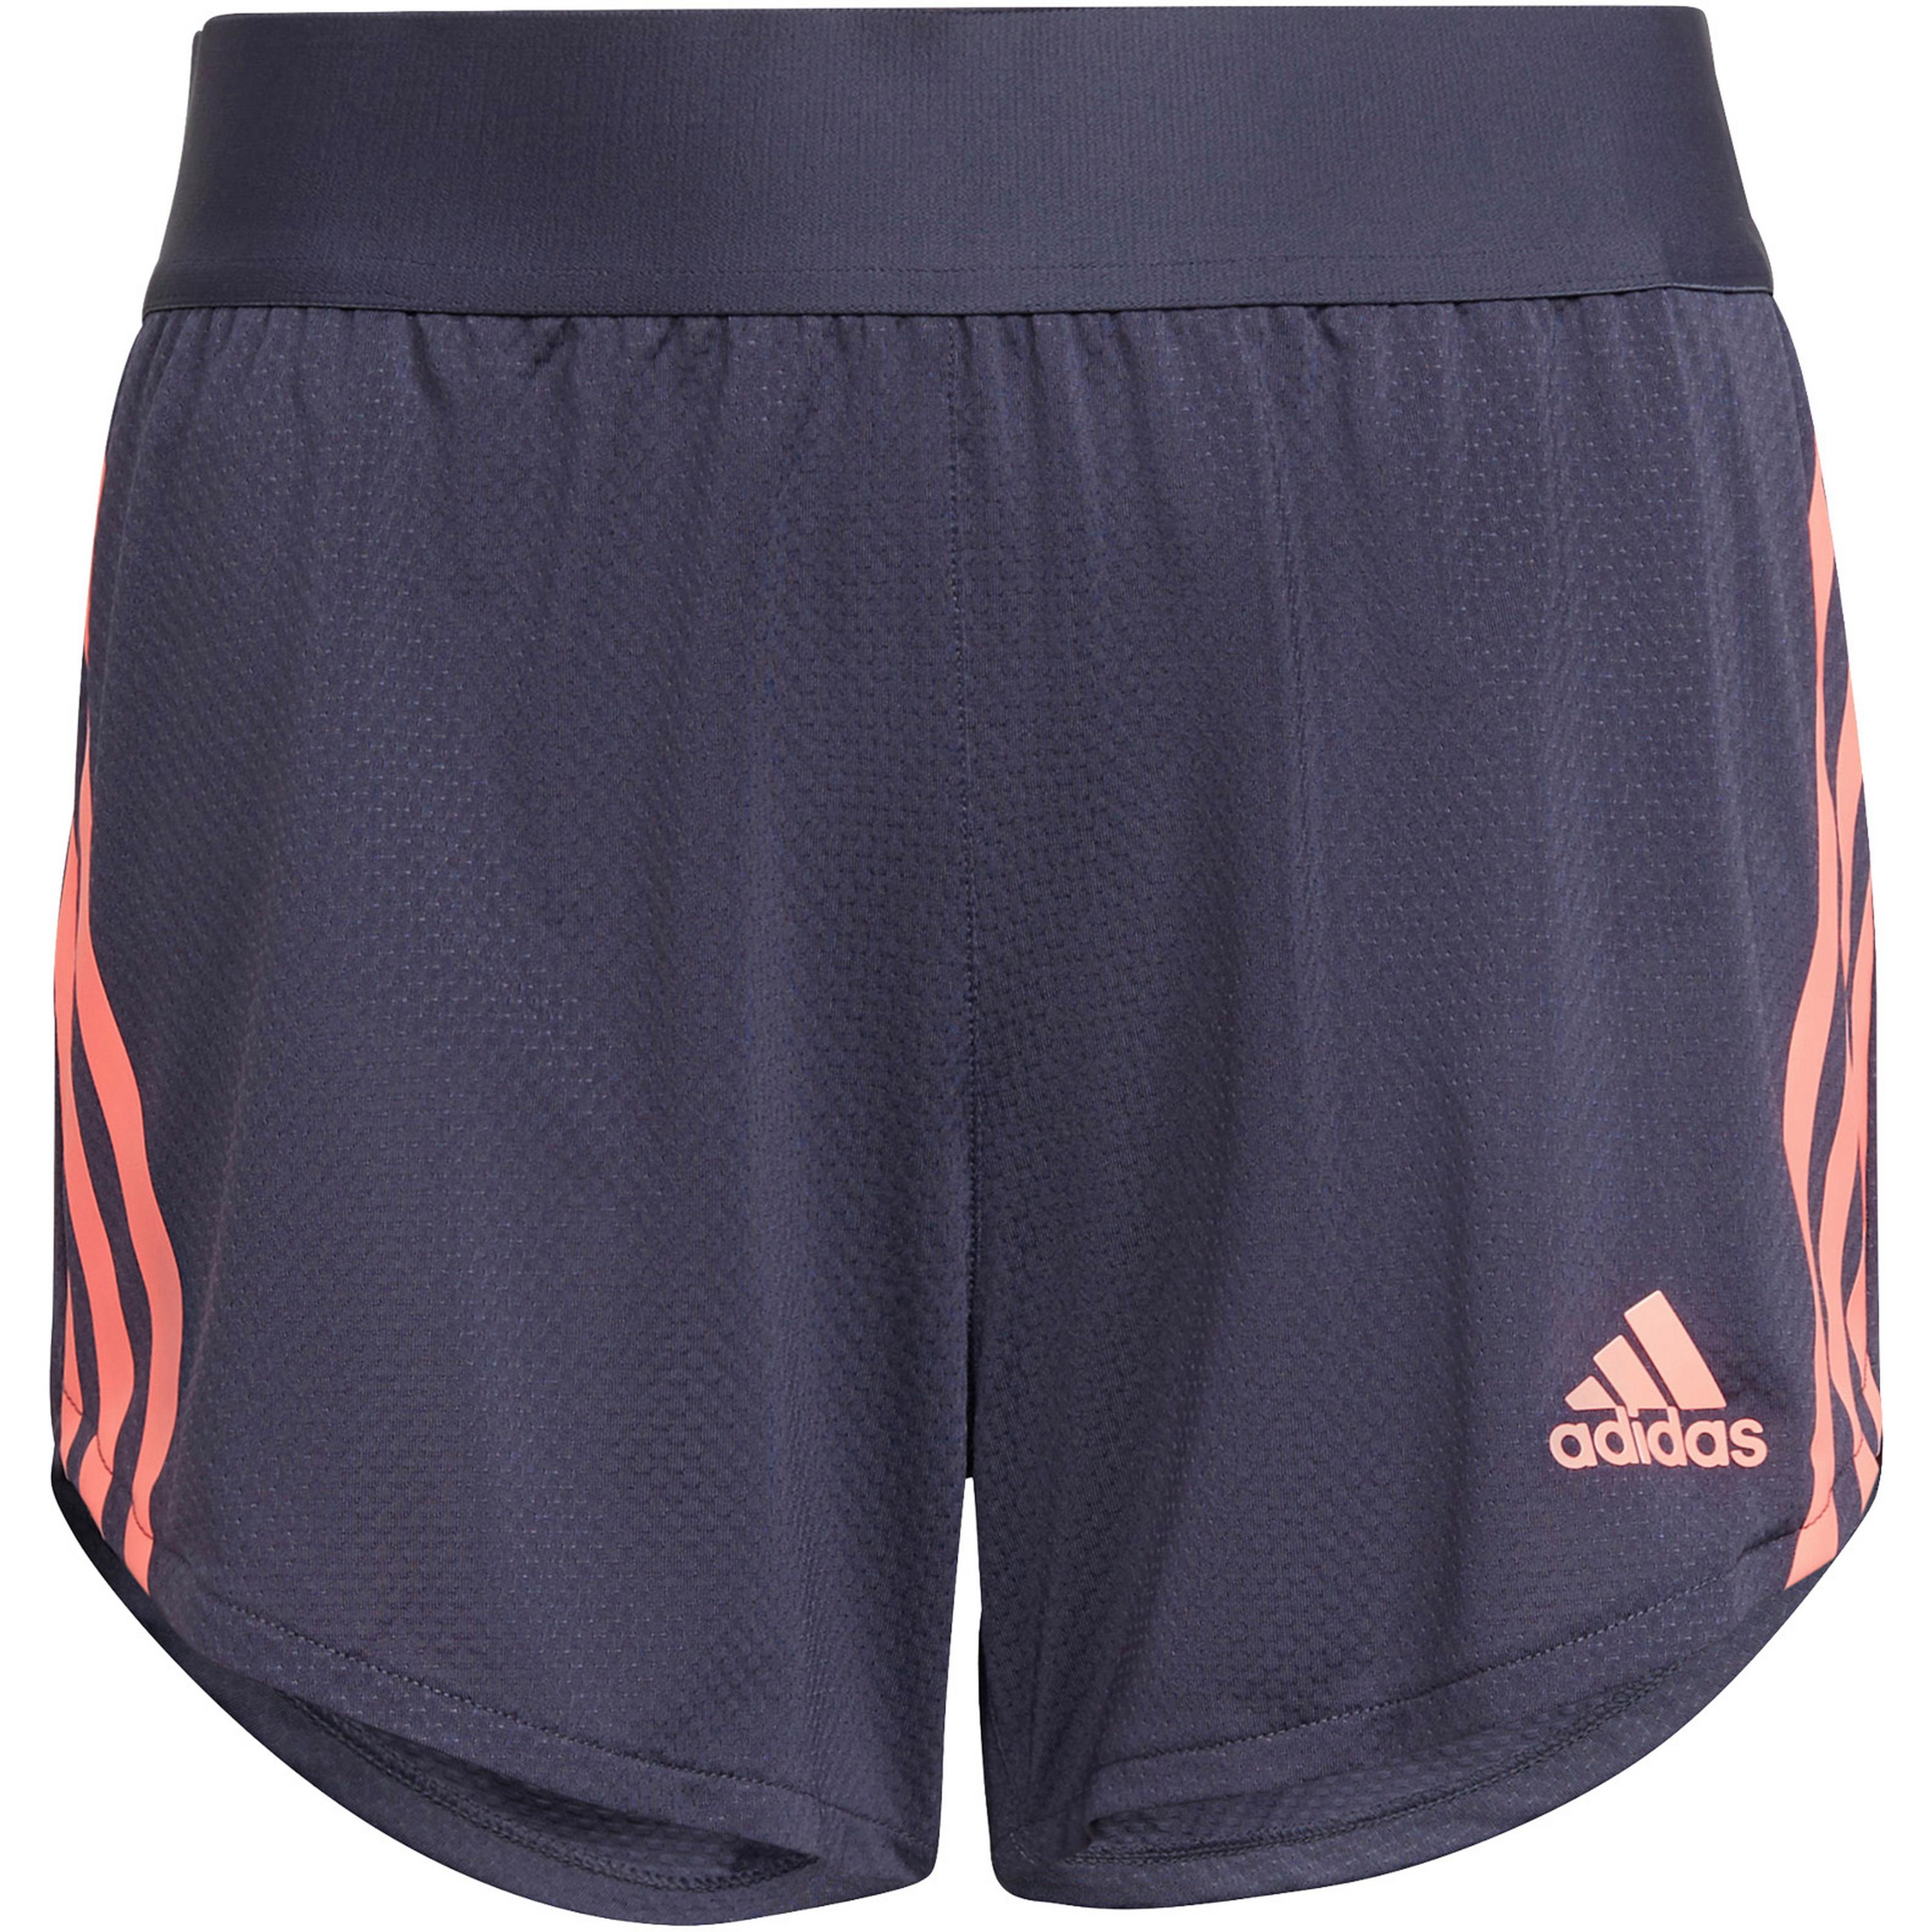 Image of adidas 3-STRIPES SPORT ICONS Funktionsshorts Mädchen